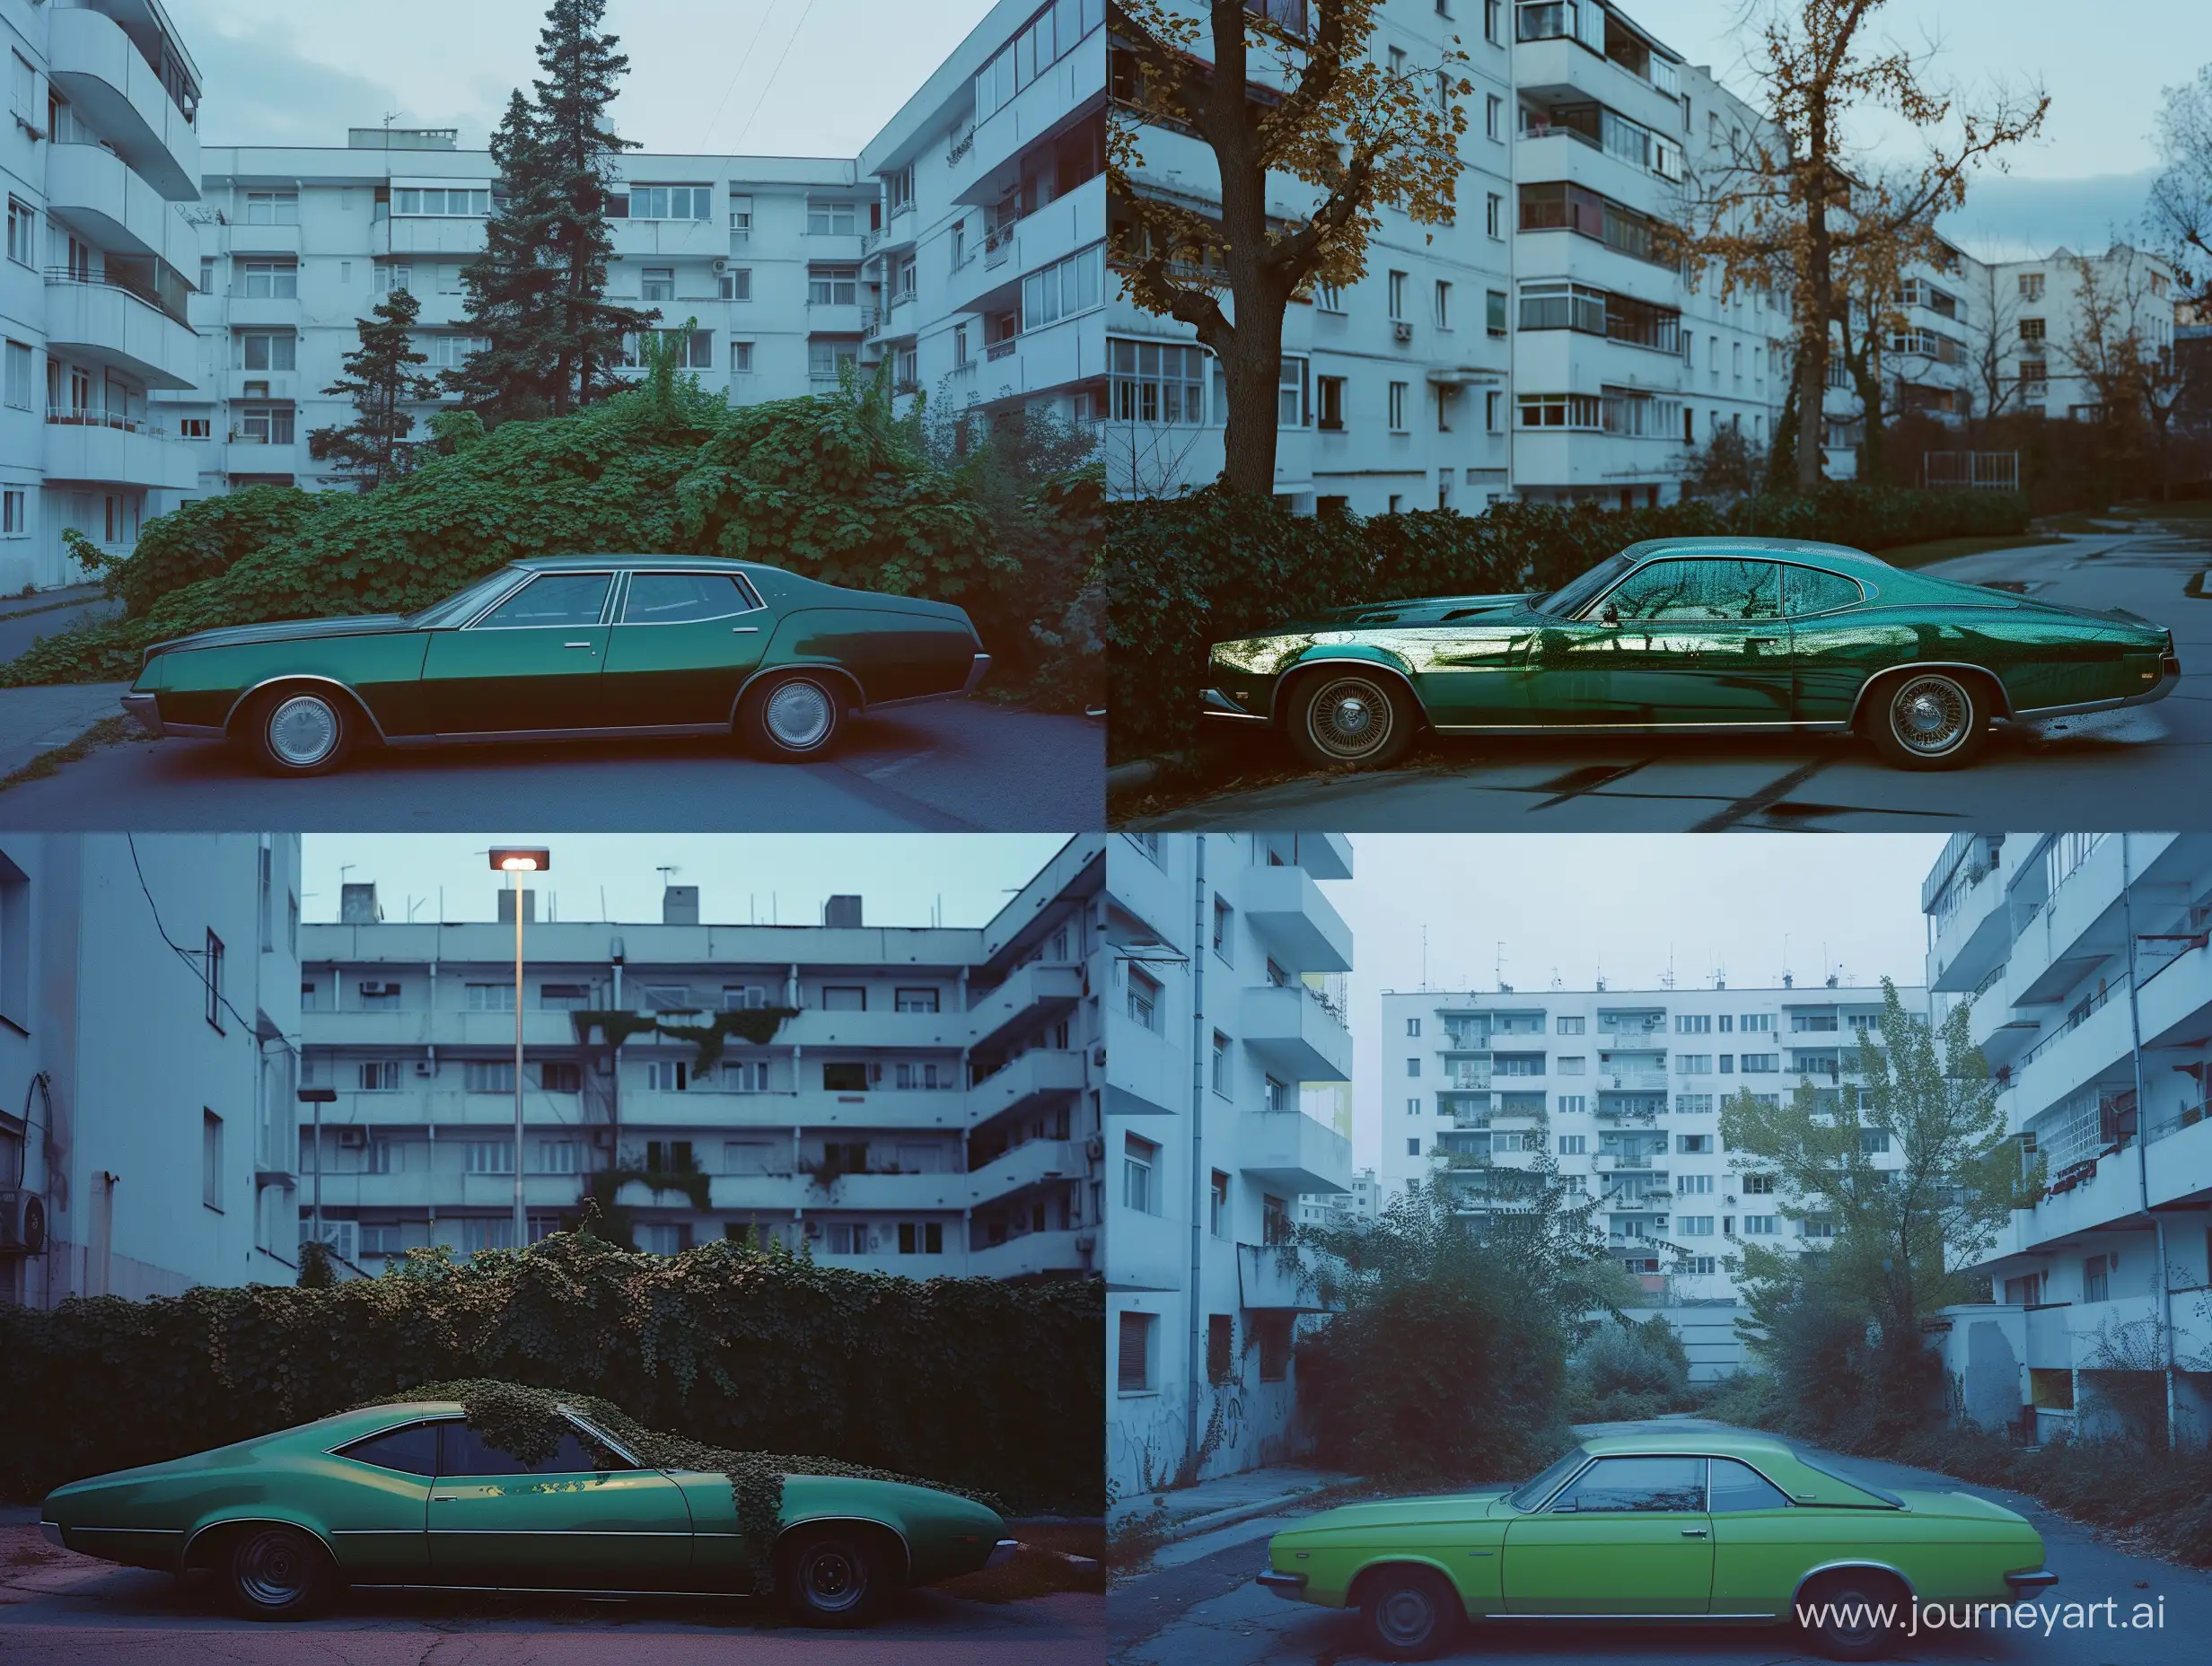 Liminal-Space-in-Romania-Shiny-Green-Retro-Car-on-Residential-Street-at-Dawn